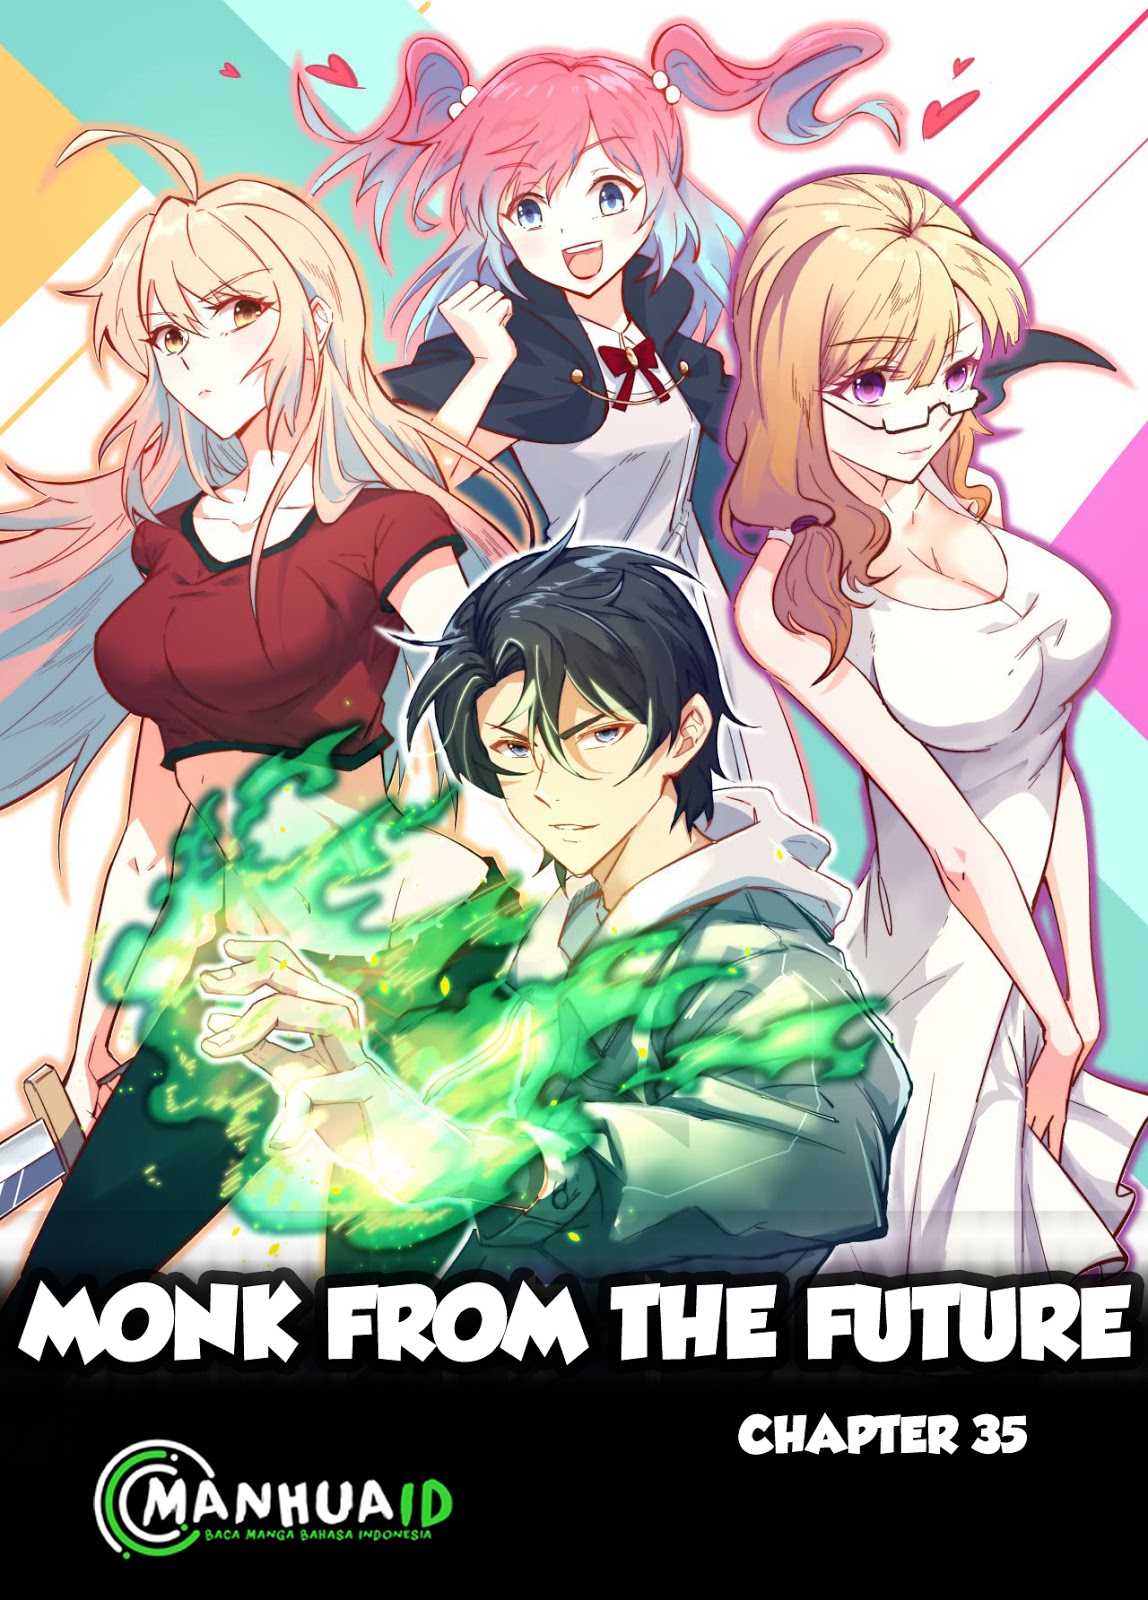 Monk From the Future Chapter 35